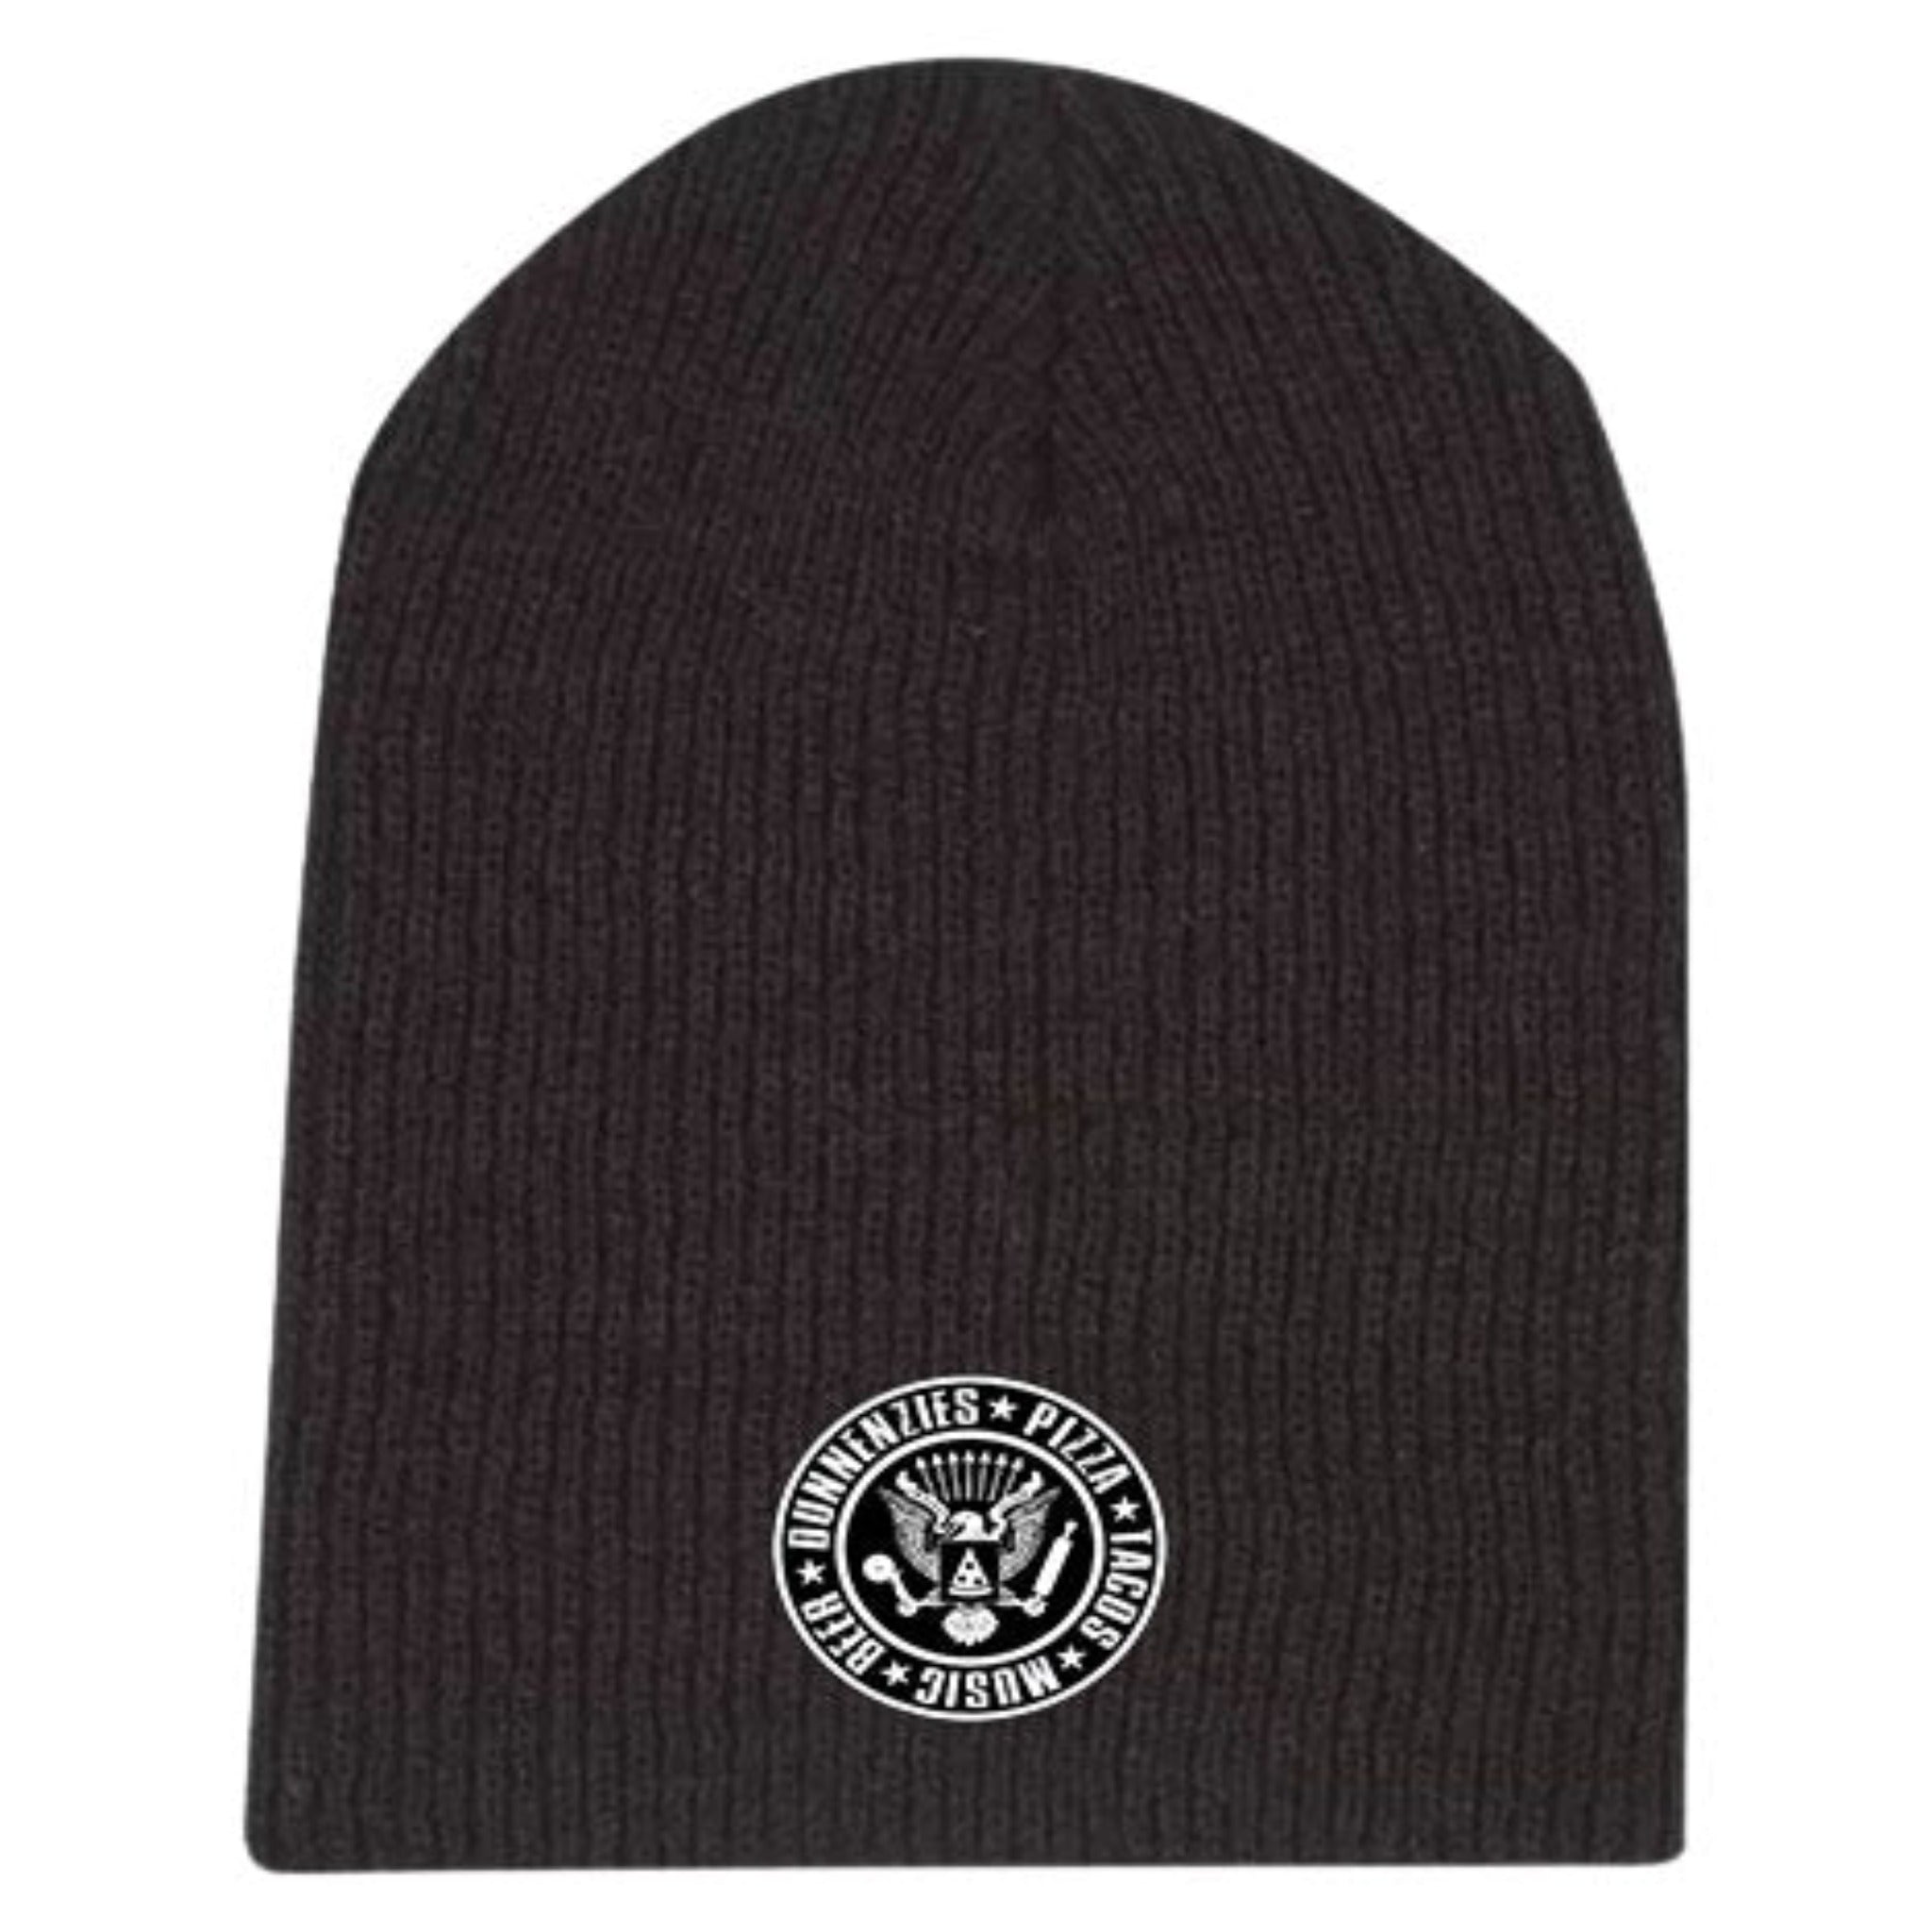 Dunnenzies Slouch Beanie - Adult Unisex  One Size Fits Most - Black